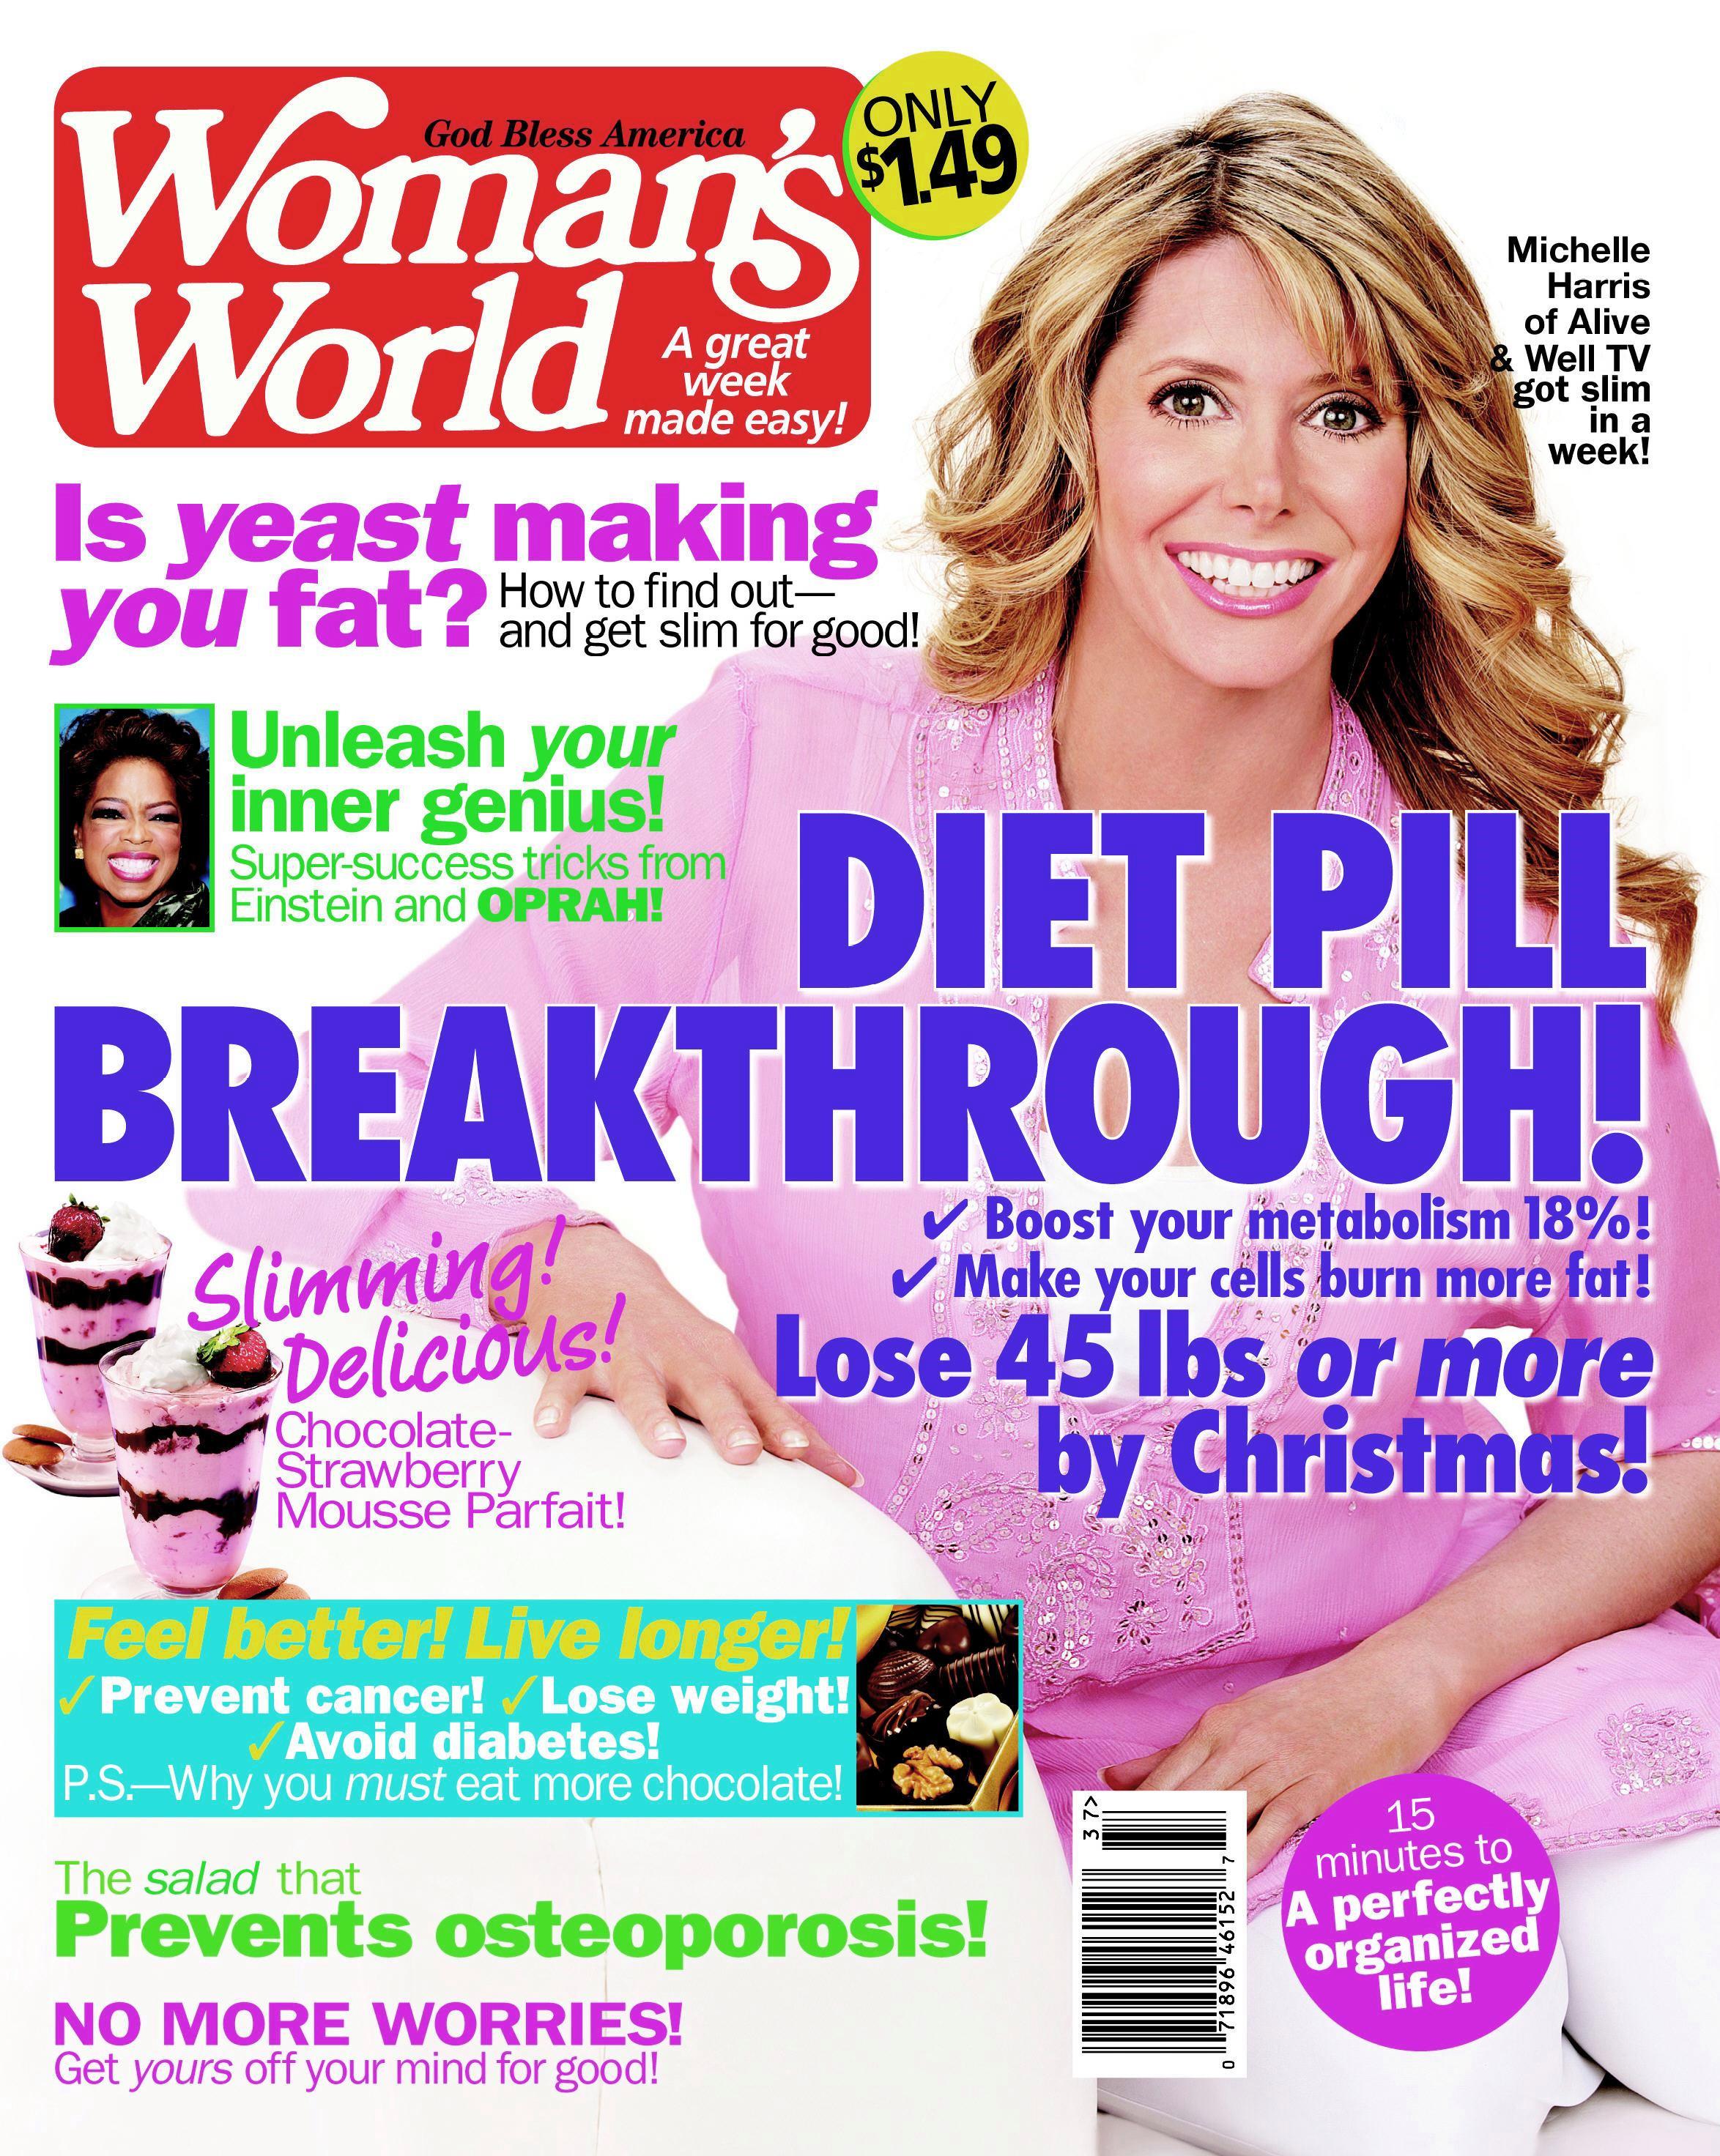 Michelle Harris from Alive & Well TV show on cover of Woman's World